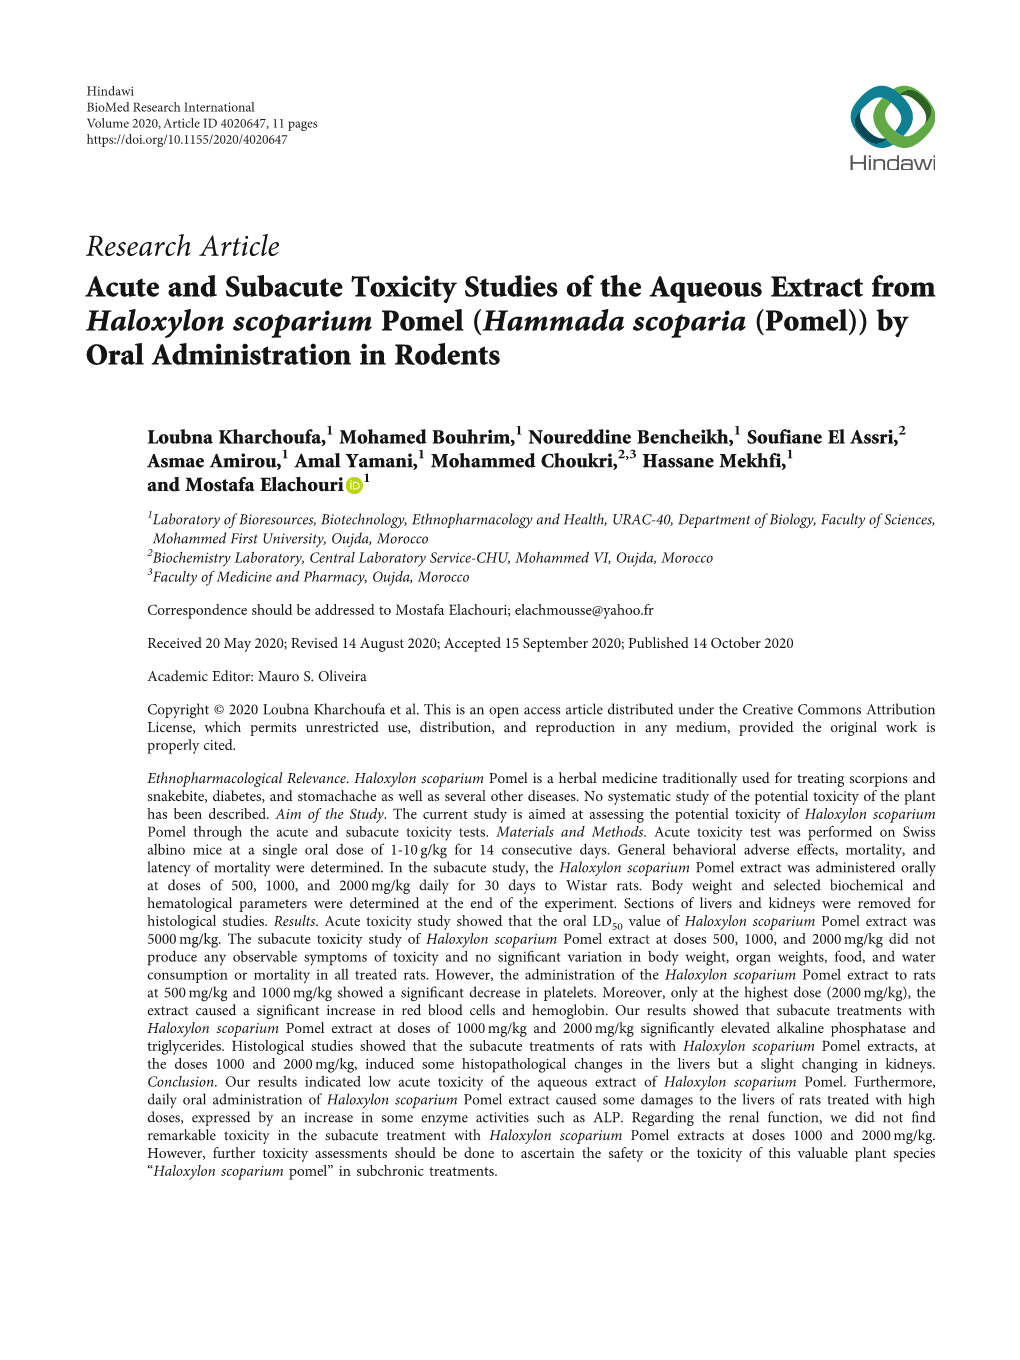 Research Article Acute and Subacute Toxicity Studies of the Aqueous